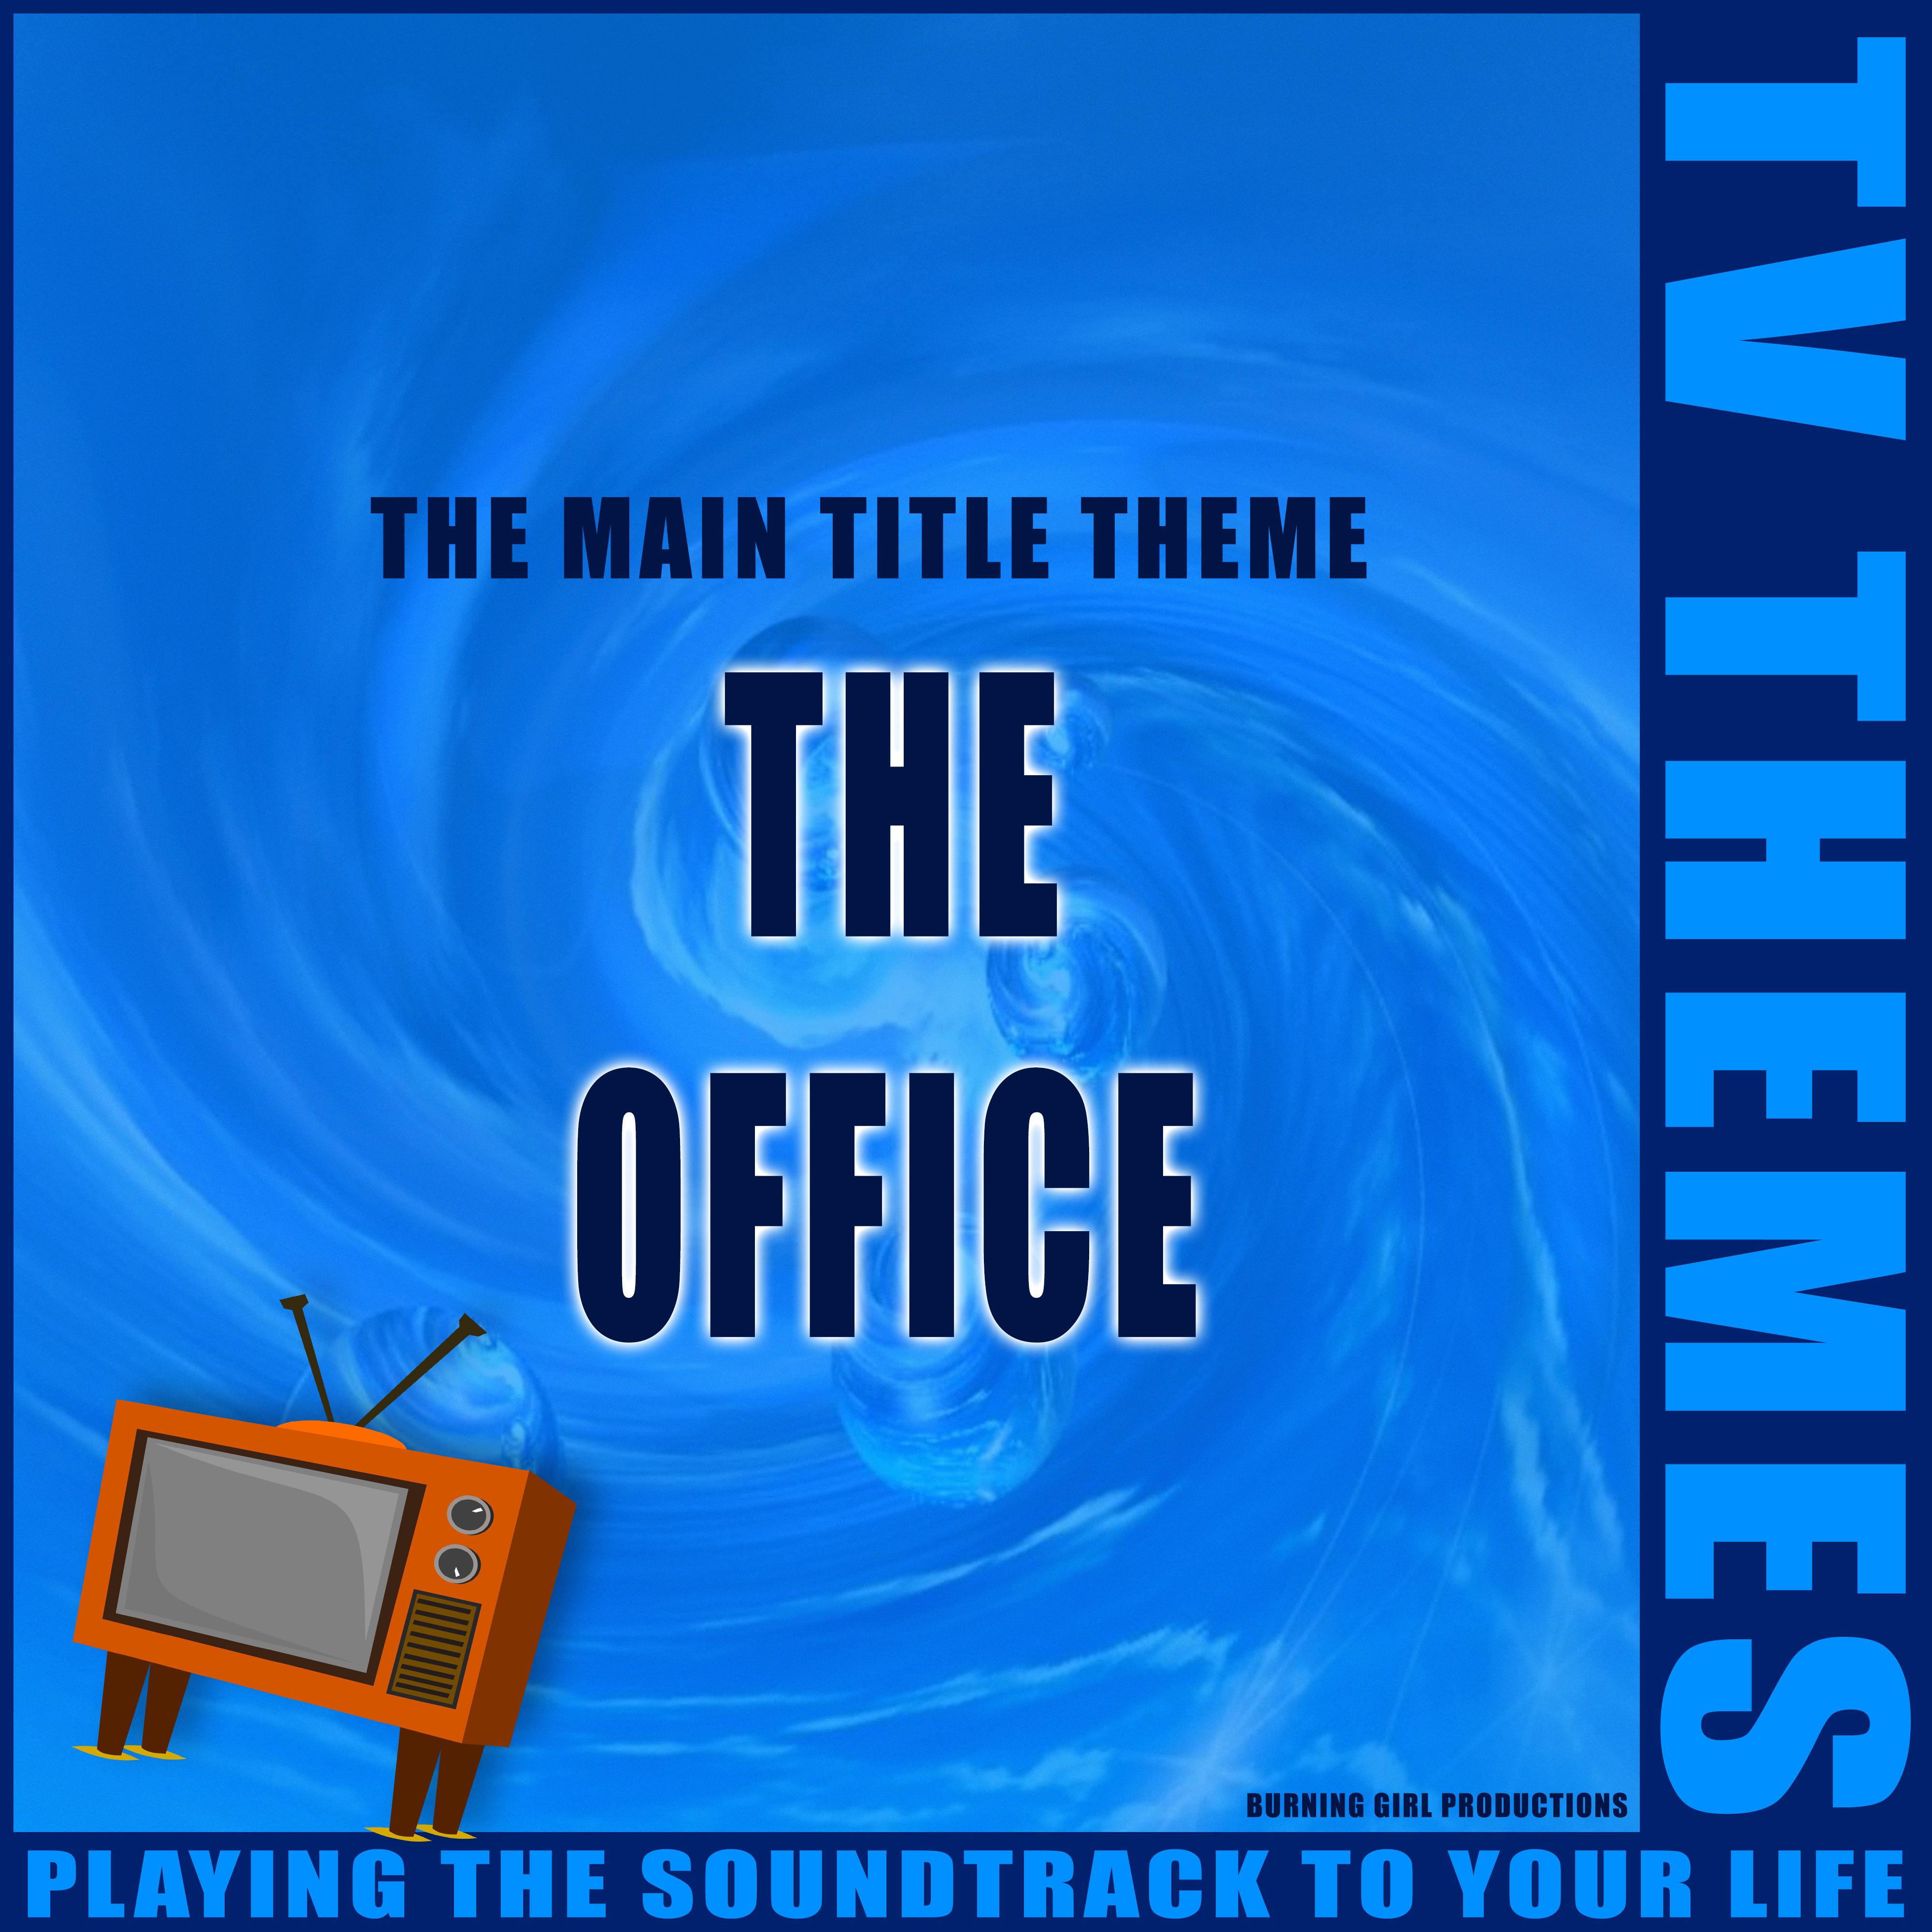 The Main Title Theme - The Office